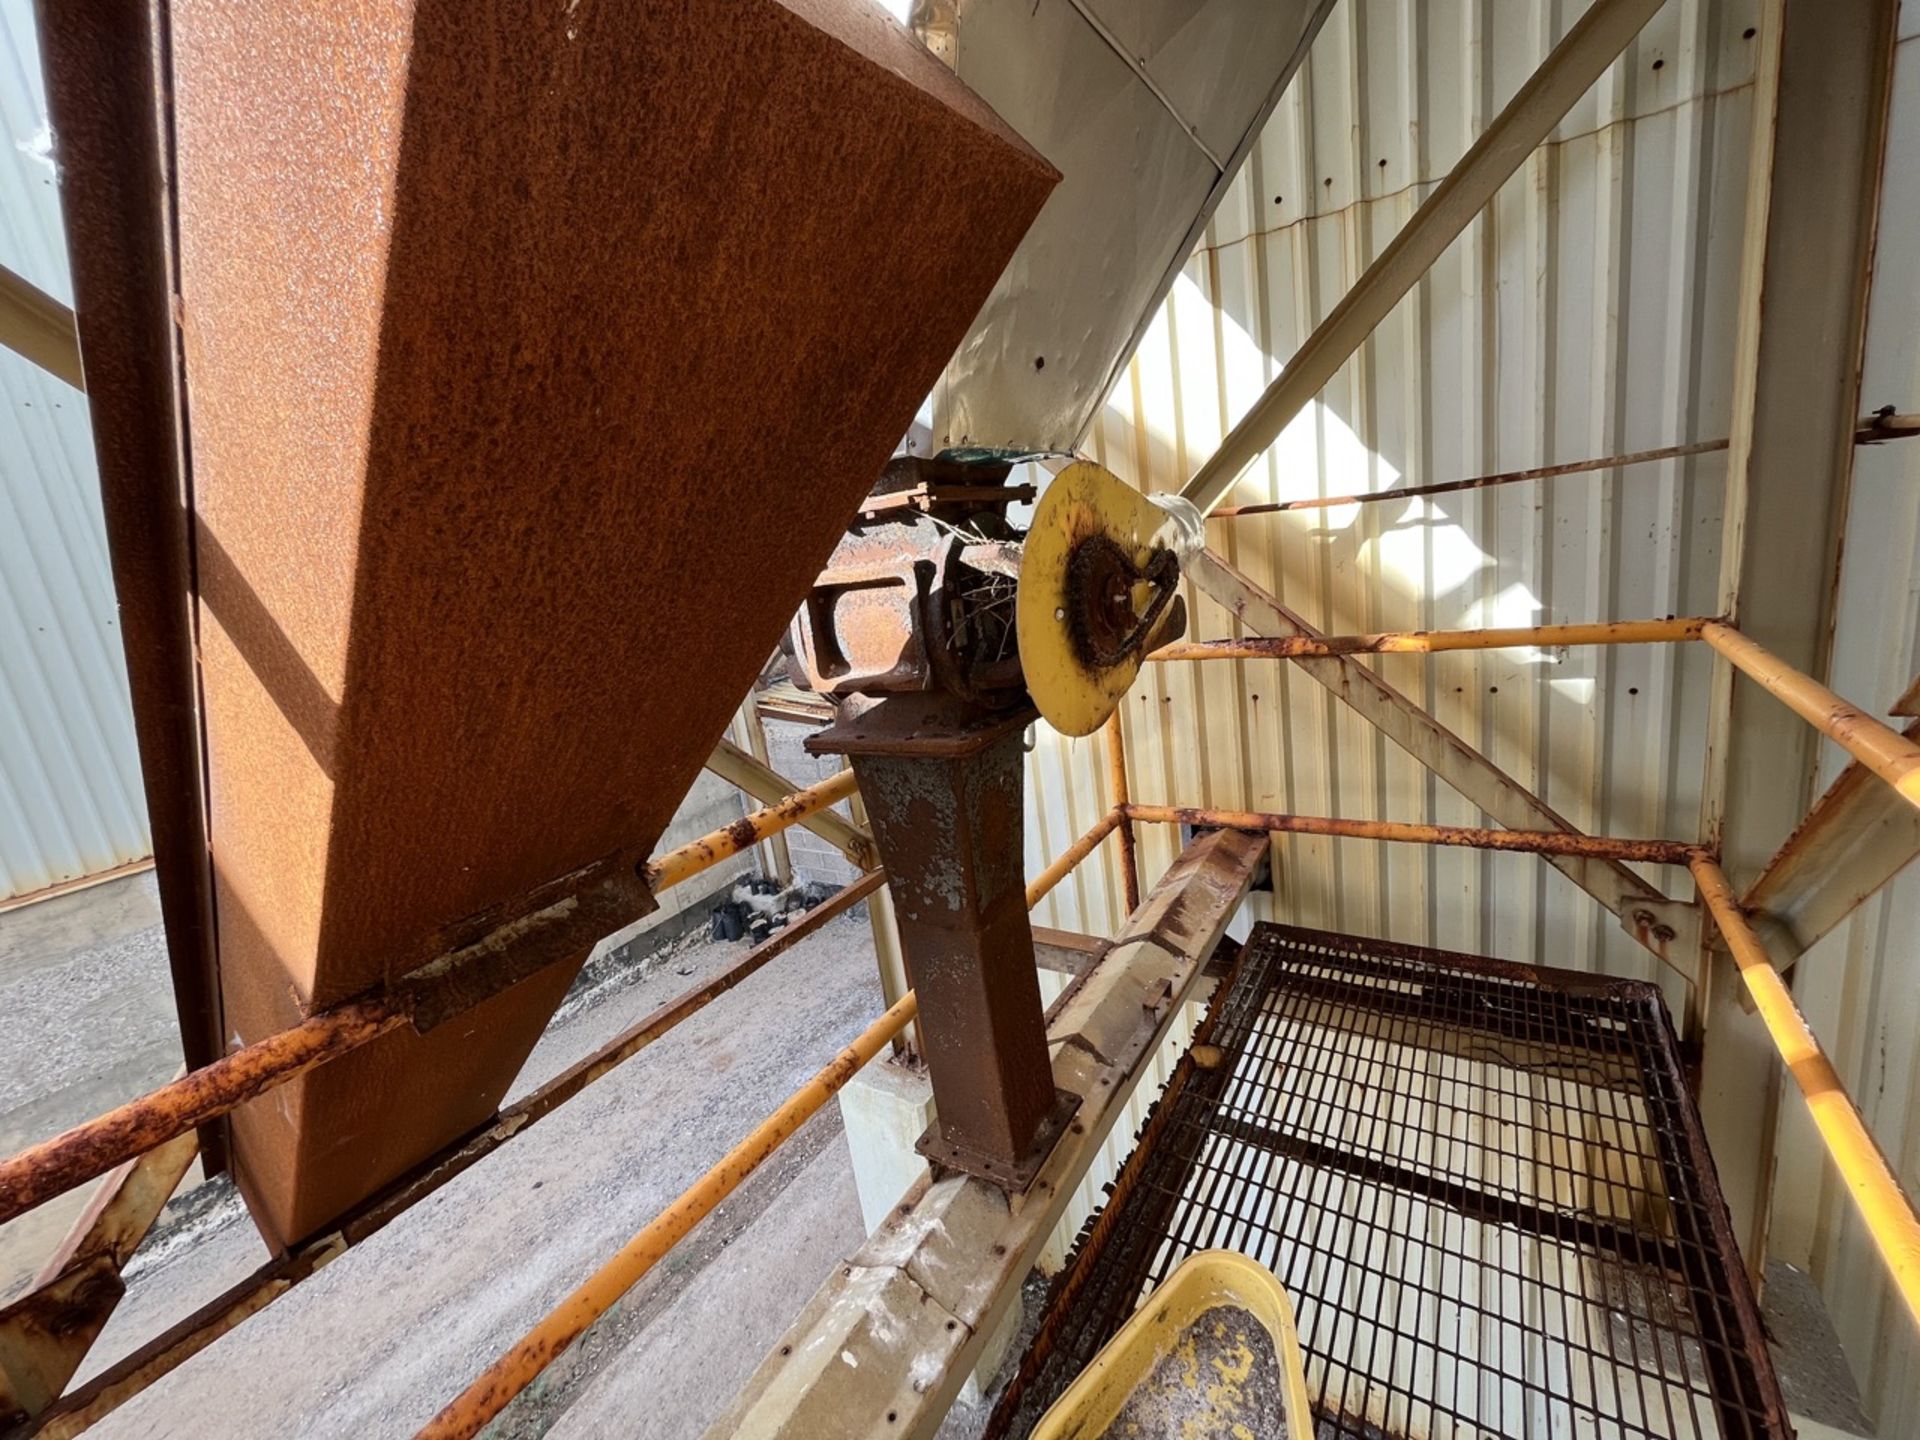 Dust Collector System includes: FLEX-KLEEN Dust Collector, Model 120 WSWC 144 III, Series 01036; wi - Bild 44 aus 62